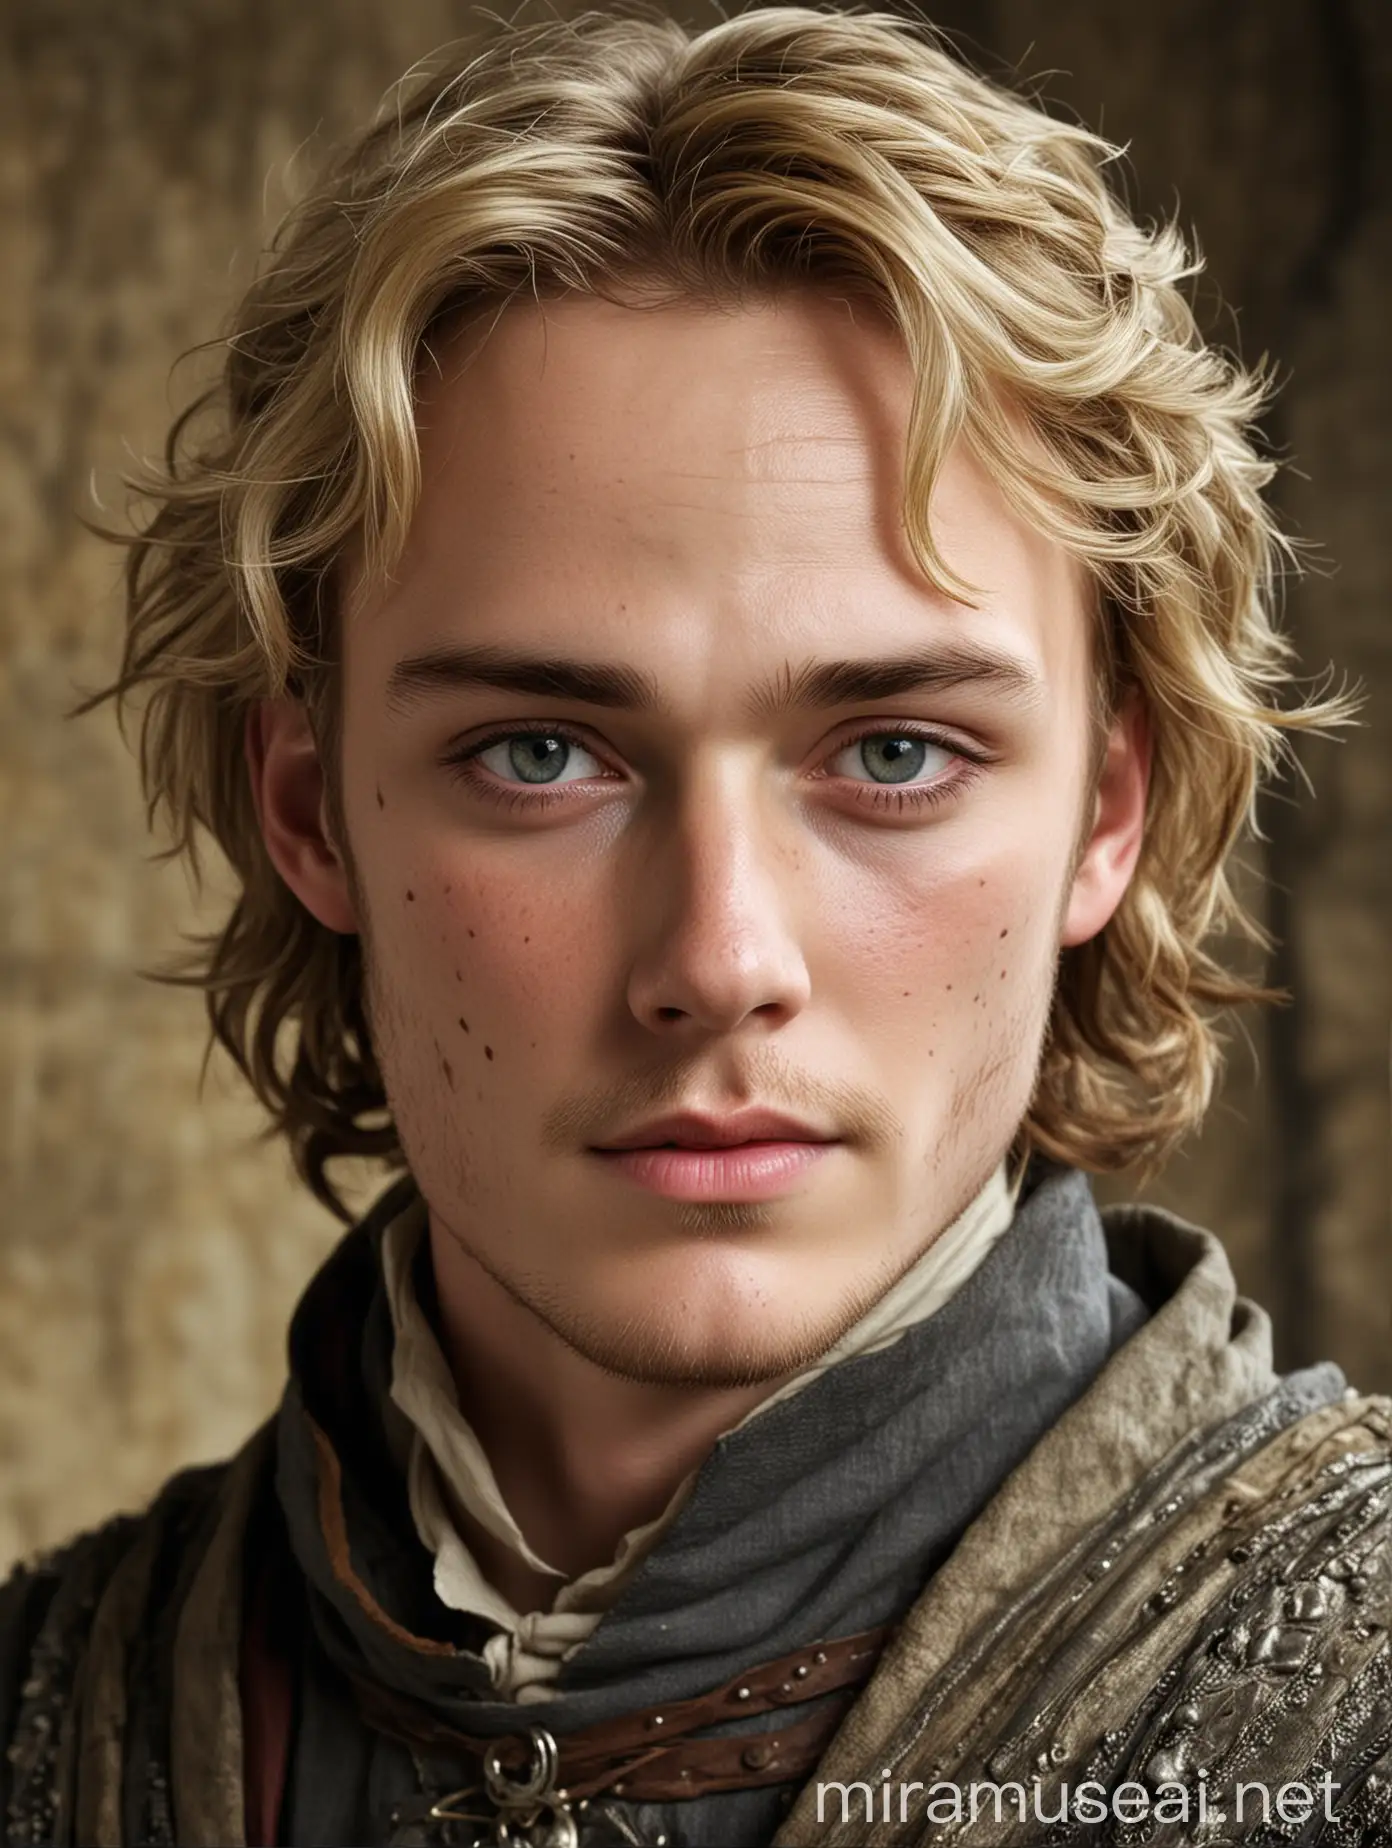 Medieval Man Portrait with Blonde Hair Grey Eyes and Freckles in Historical Clothing